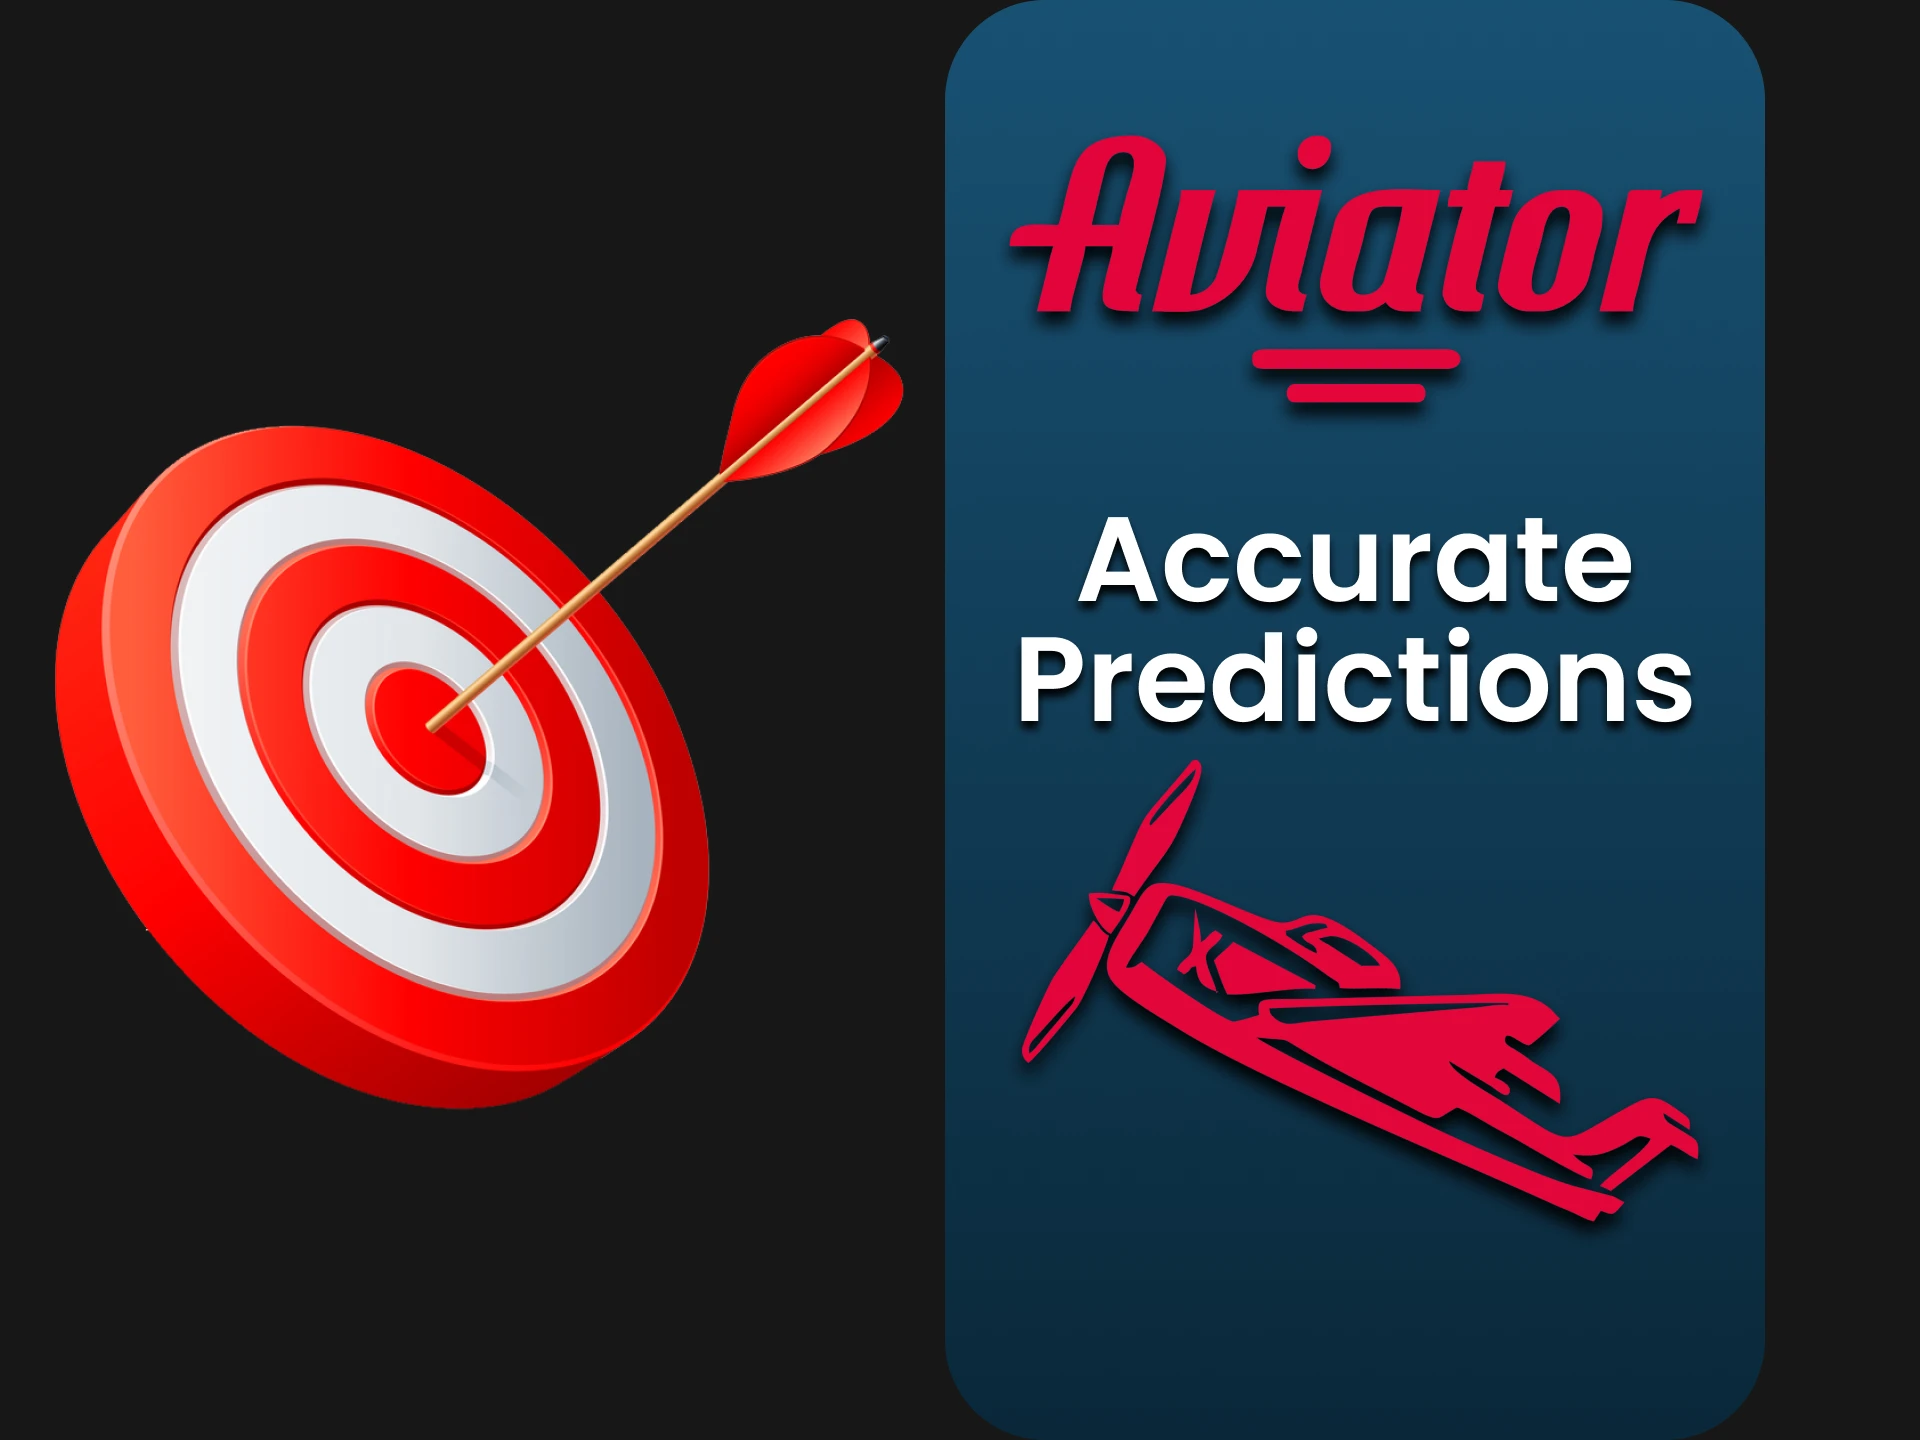 Study with what accuracy and probability Predictor for Aviator works.